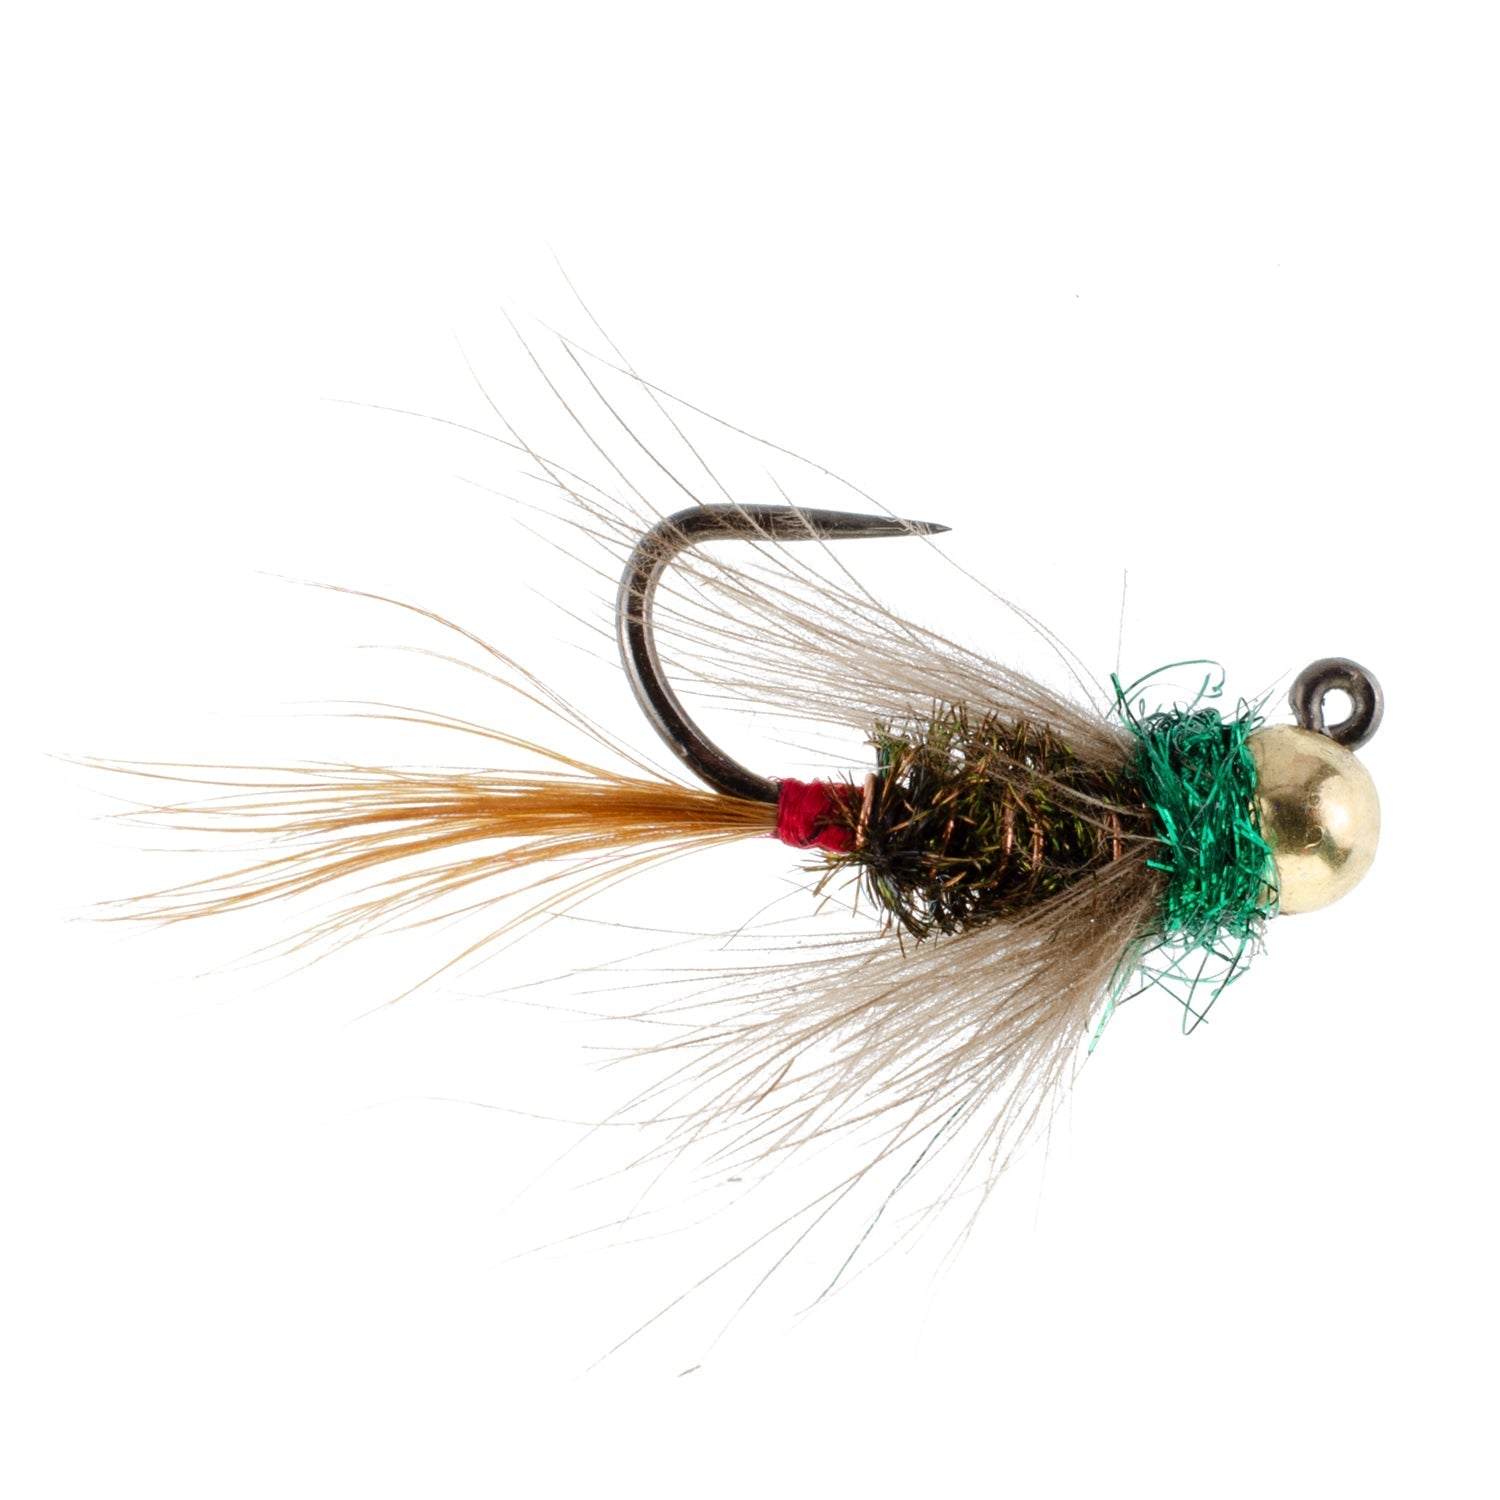 Tungsten Bead Tactical CDC Frenchie Czech Nymph Euro Nymphing Fly - 6 Flies Size 16